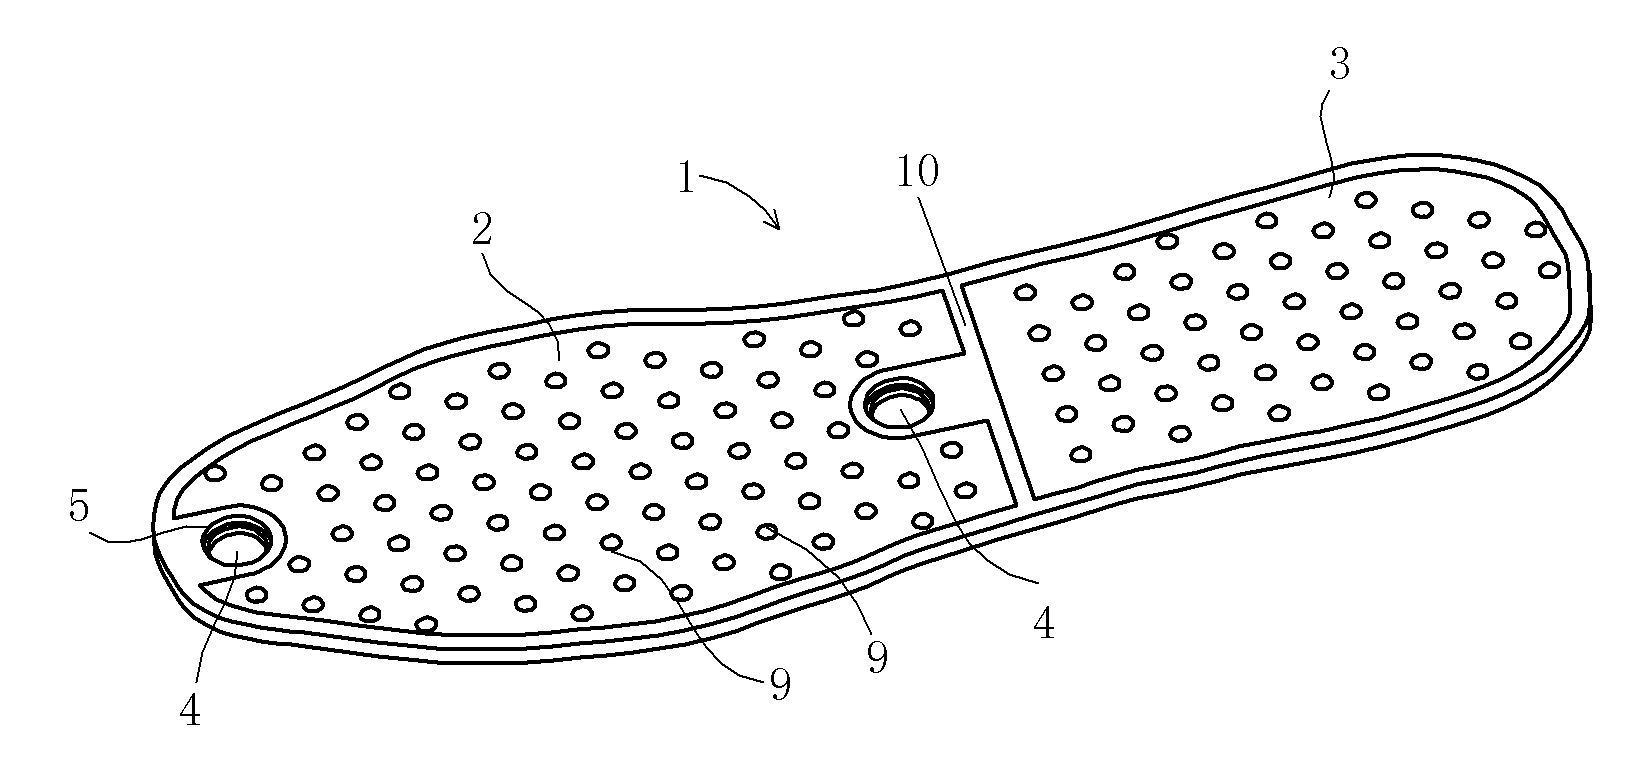 Adjustable insole